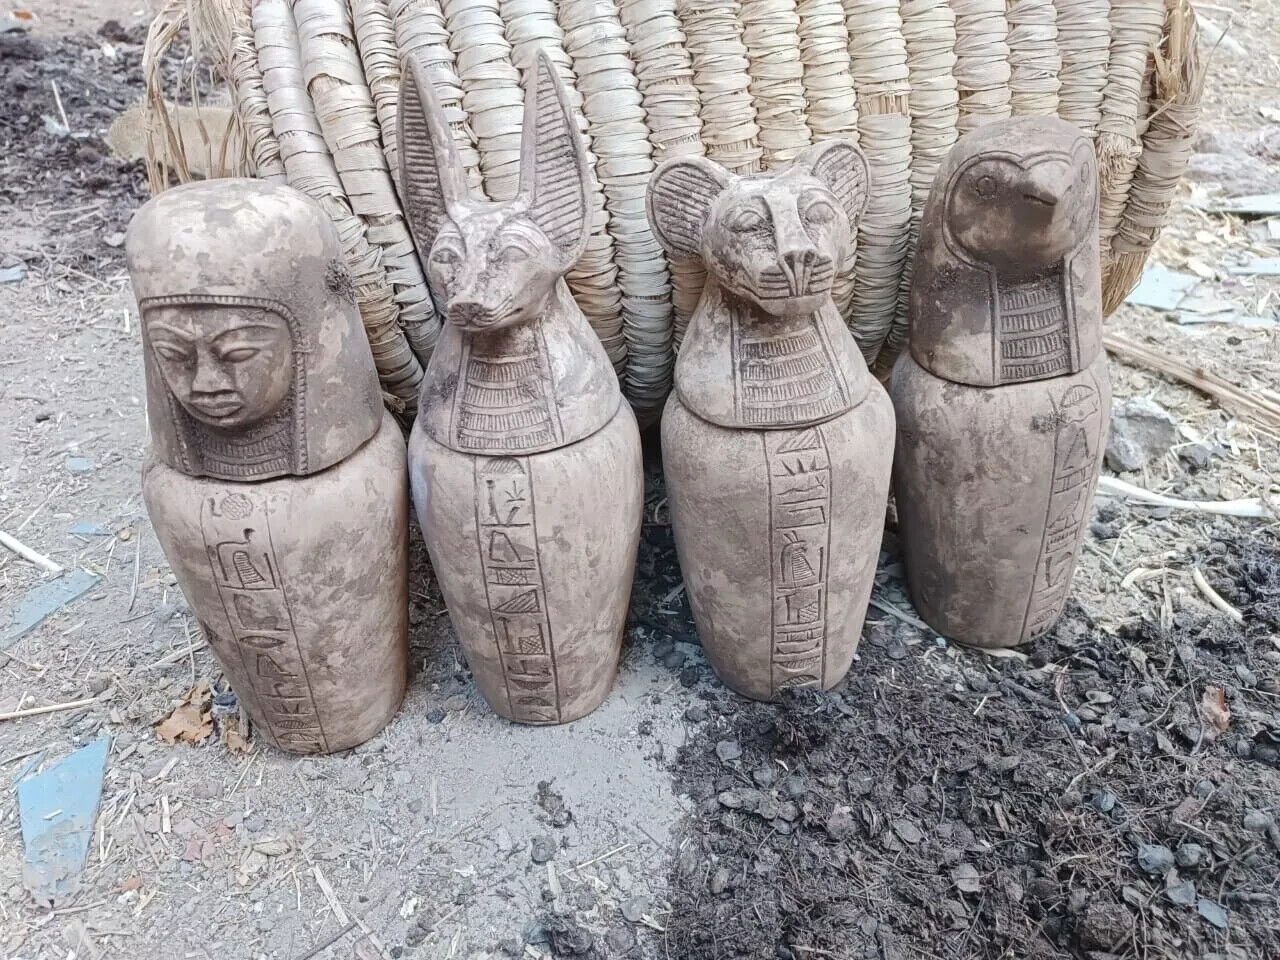 Among the ancient Egyptian antiquities are four canopic jars in Egypt BC